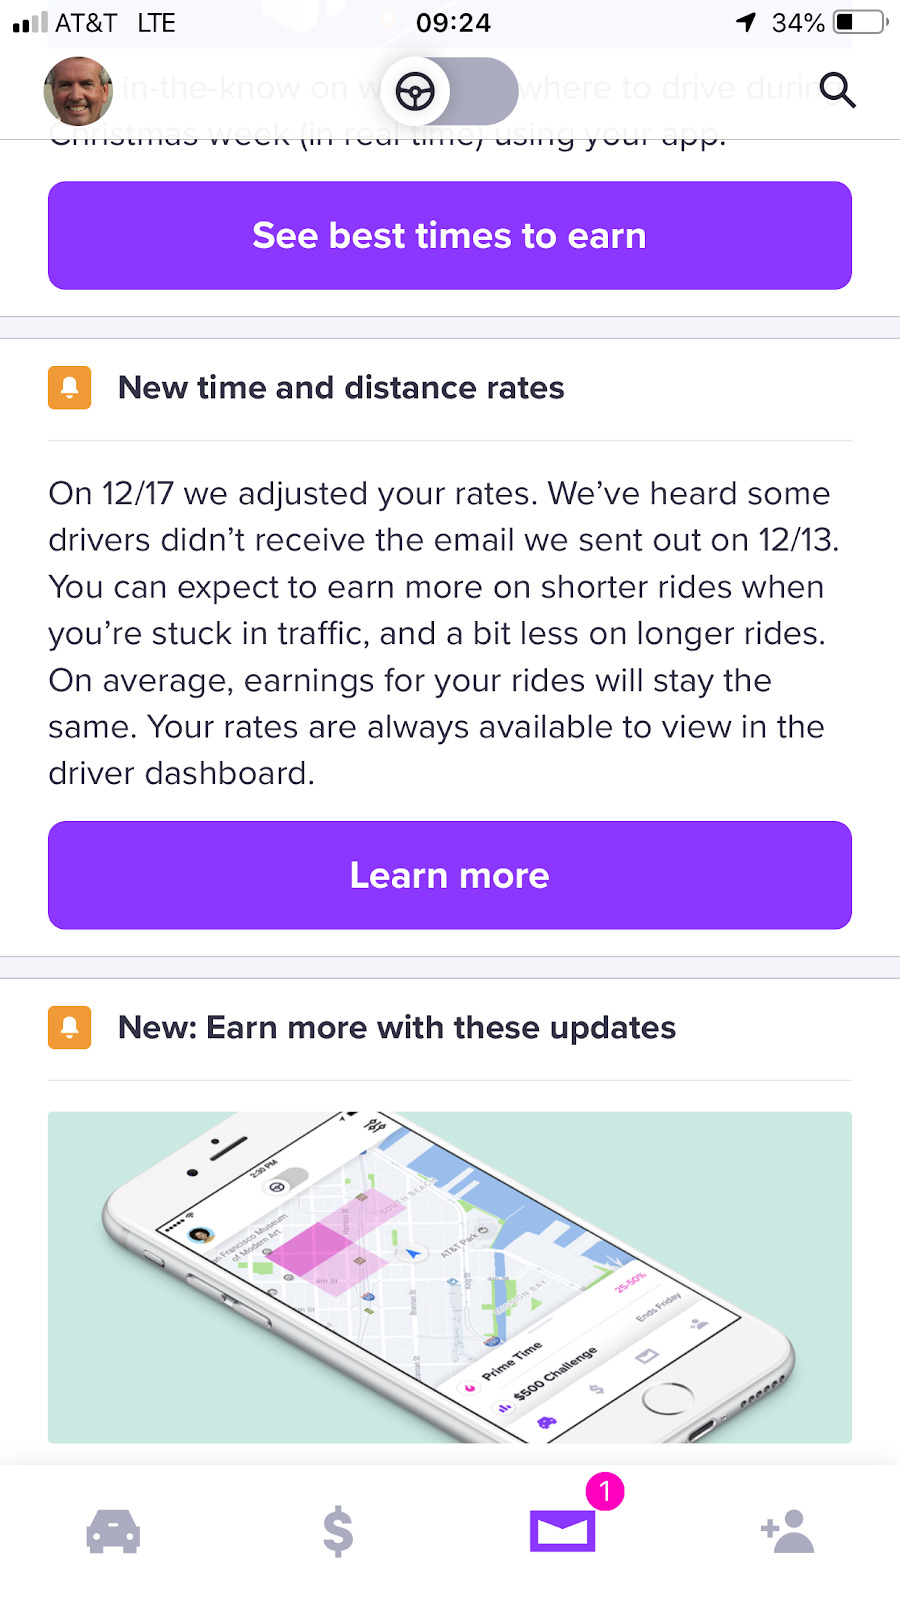 image of rate adjustment notice from Lyft